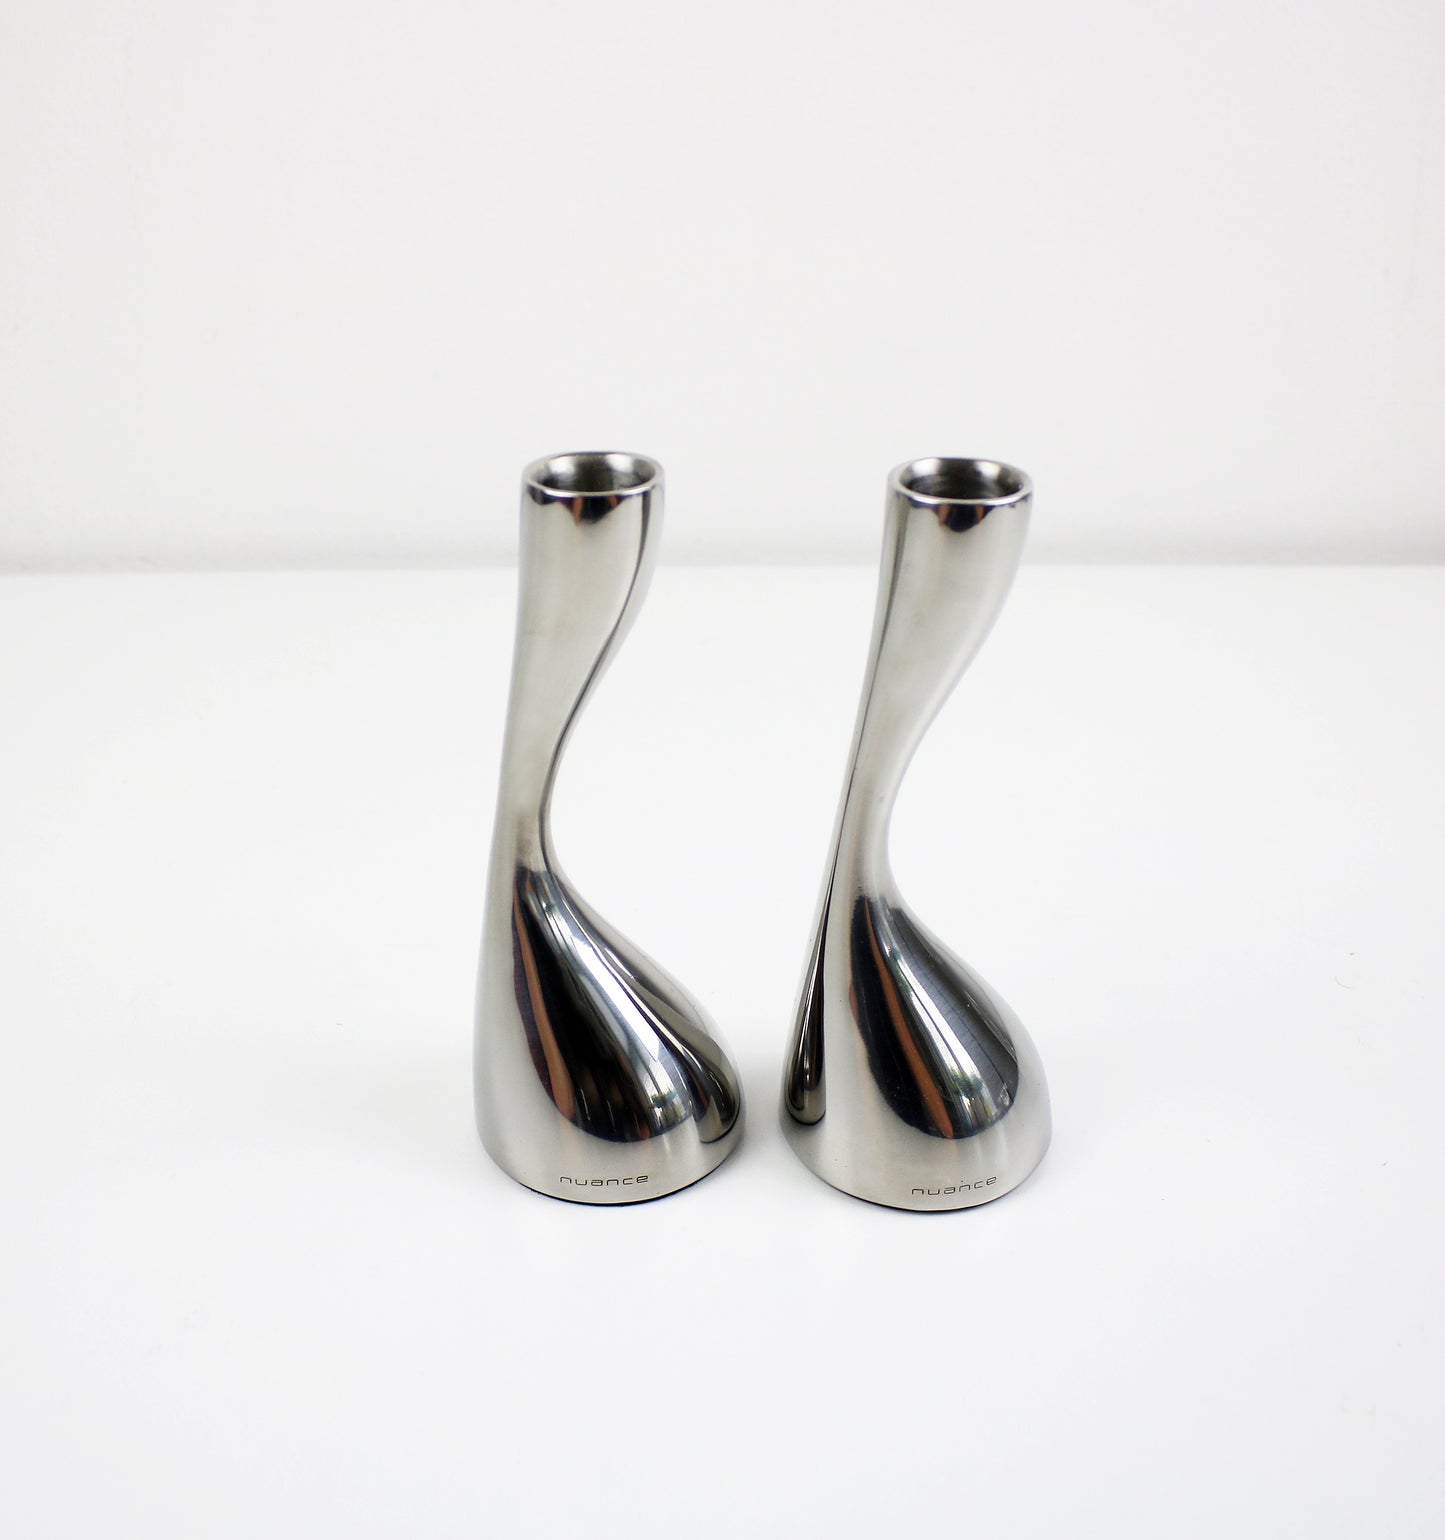 Marcus Vagnby for Nuance Danish candlestick pair - preloved - 2000s